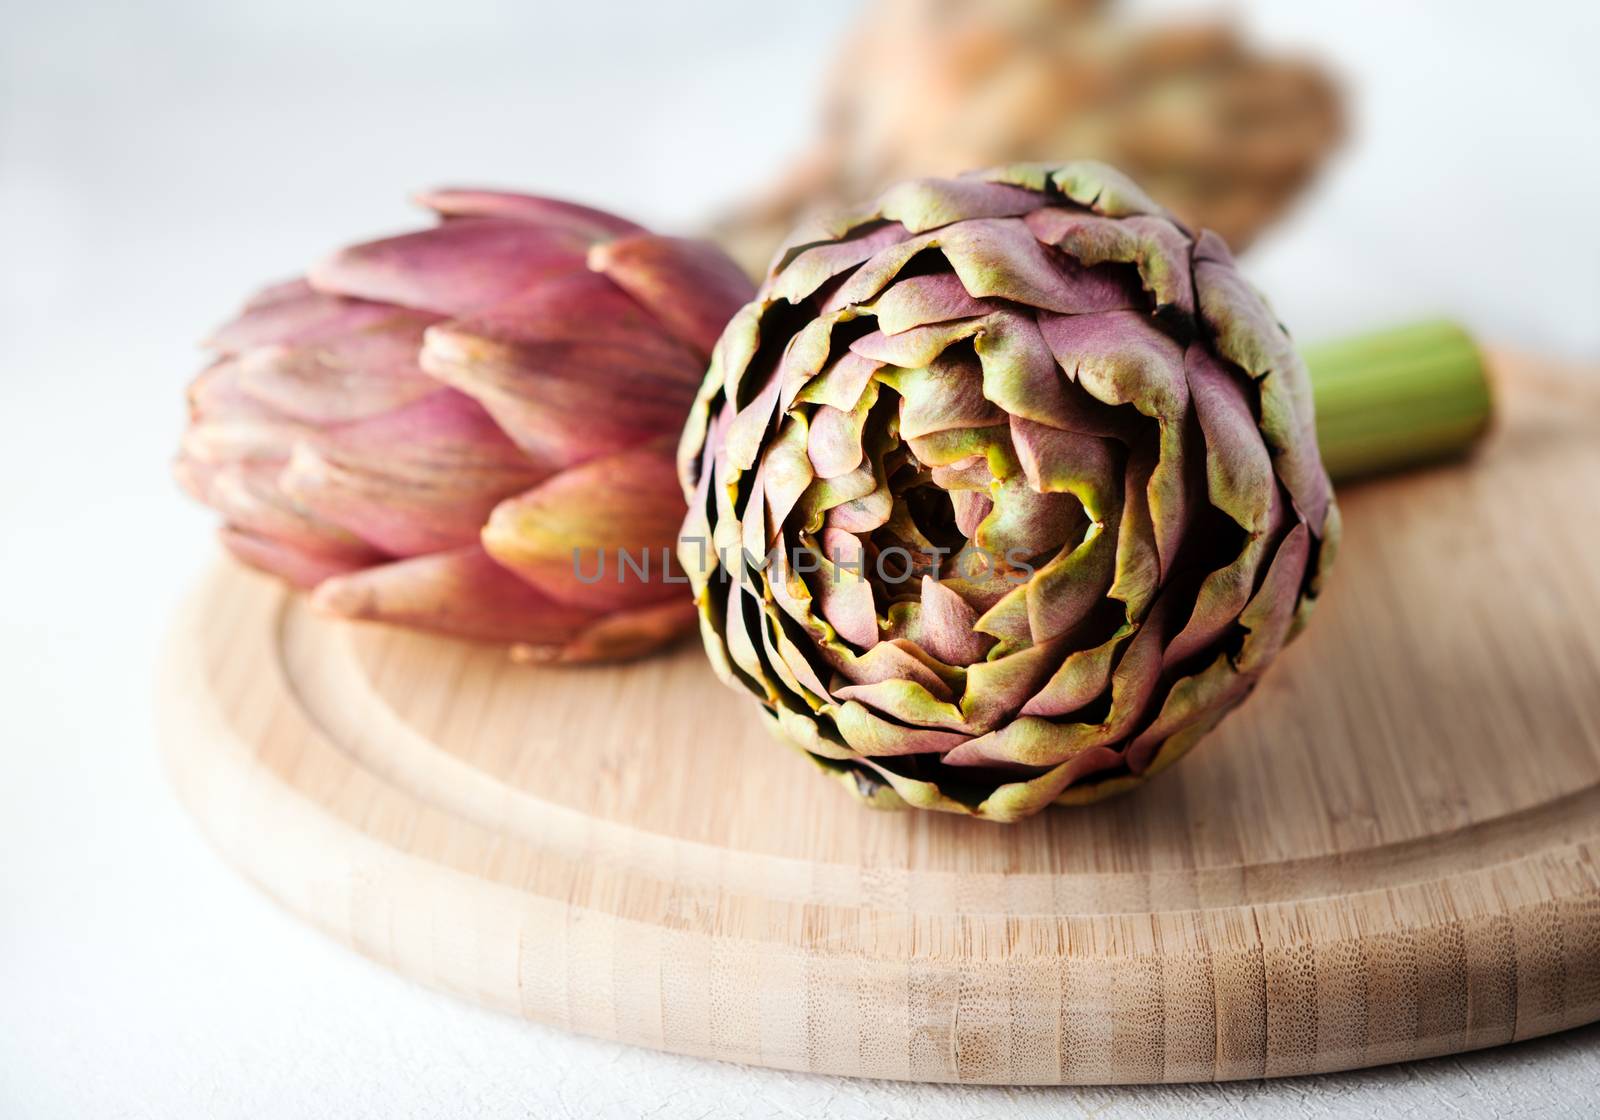 Three artichokes on a wooden cutting board by supercat67